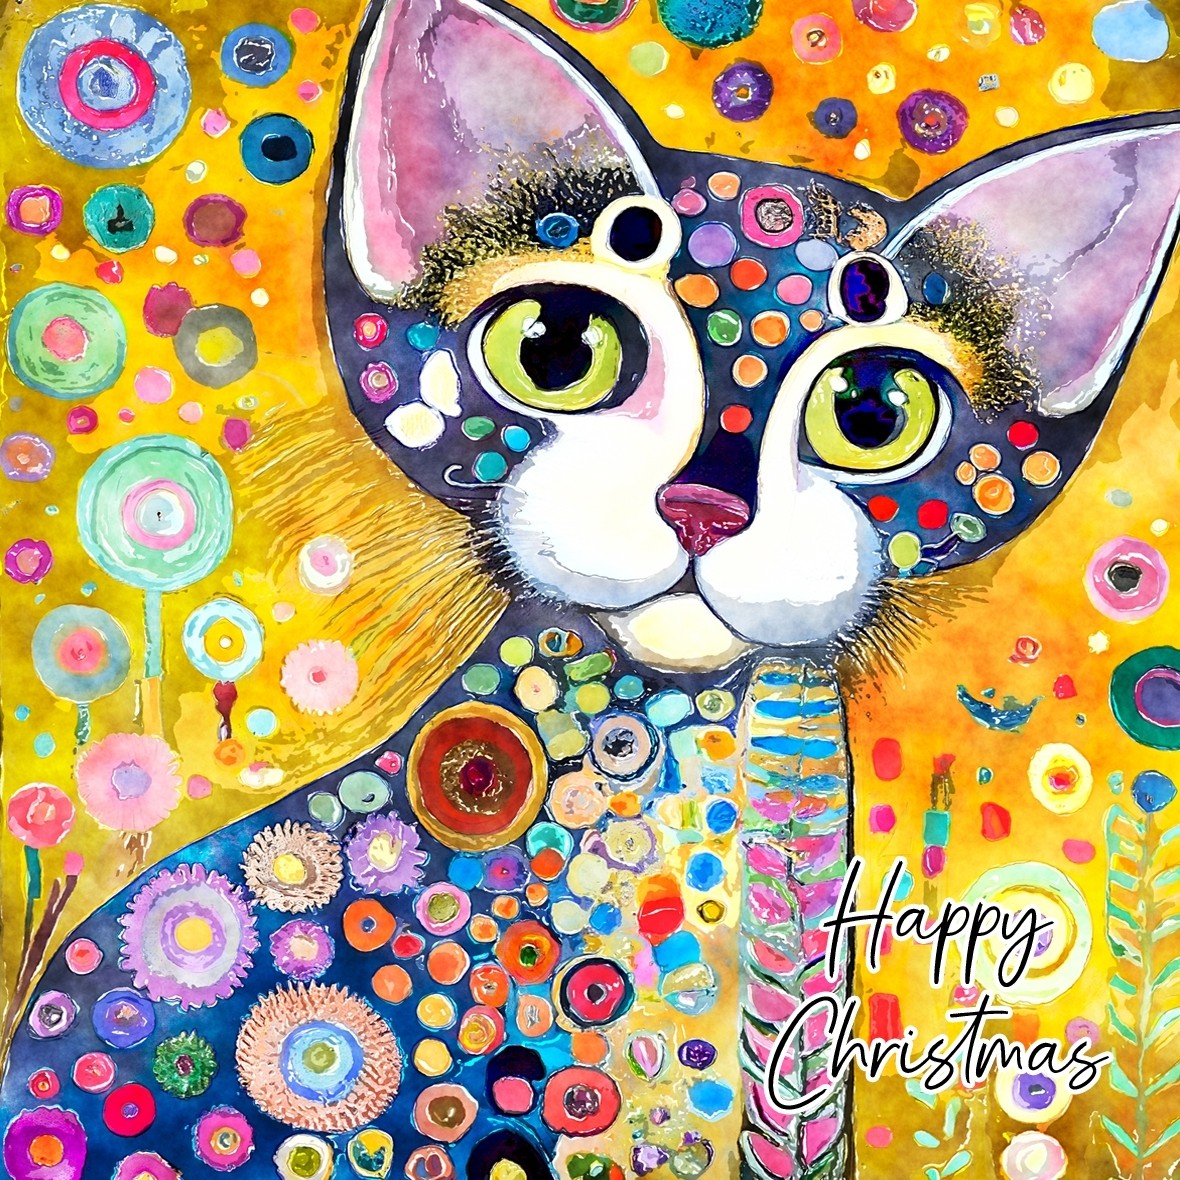 Cat Art Colourful Christmas Square Greeting Card (Design 7)